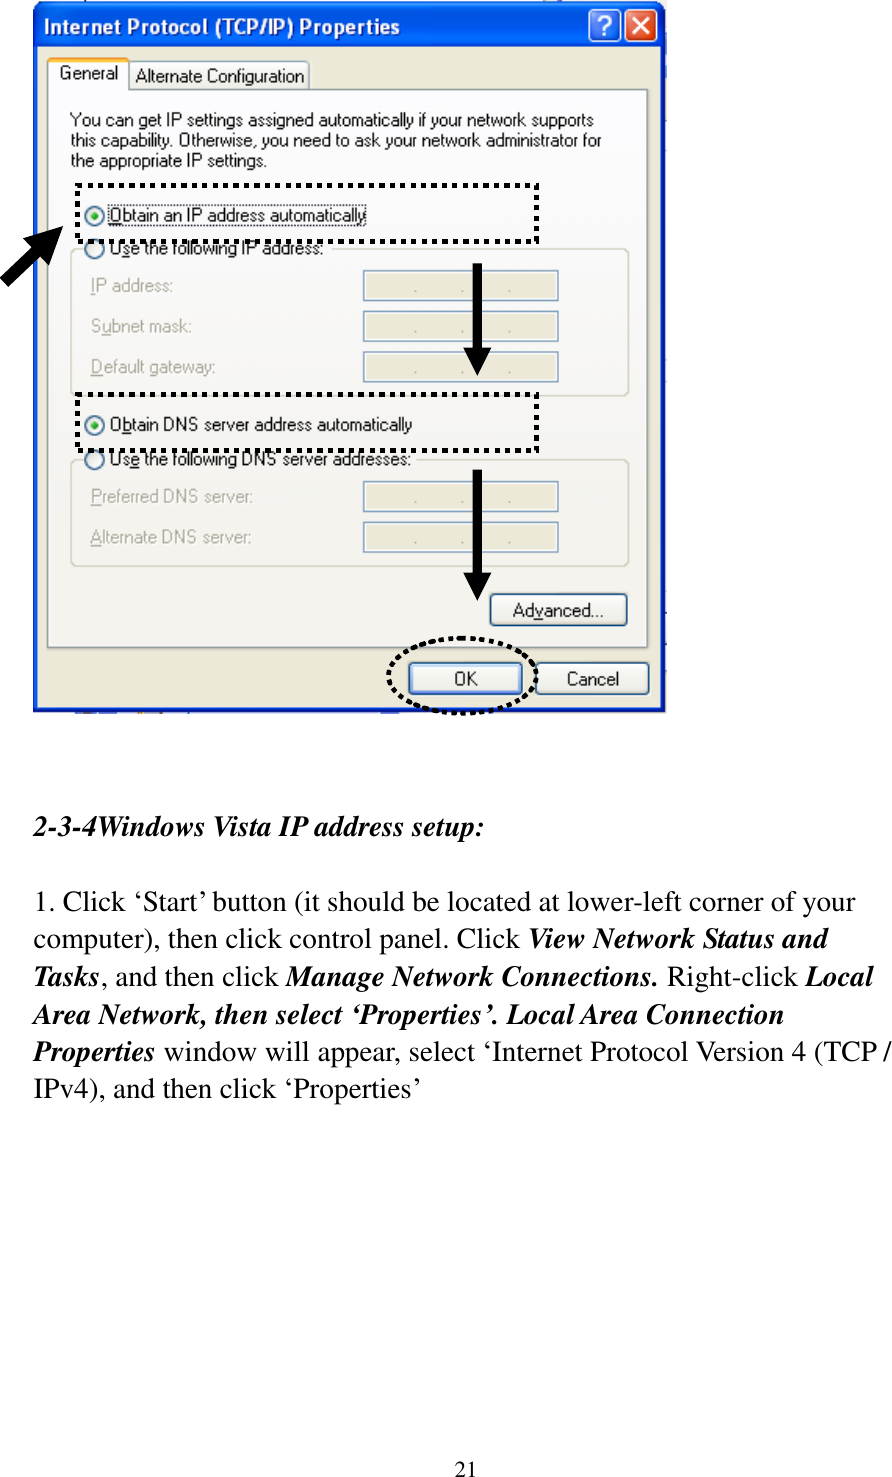 21    2-3-4Windows Vista IP address setup:  1. Click „Start‟ button (it should be located at lower-left corner of your computer), then click control panel. Click View Network Status and Tasks, and then click Manage Network Connections. Right-click Local Area Network, then select ‘Properties’. Local Area Connection Properties window will appear, select „Internet Protocol Version 4 (TCP / IPv4), and then click „Properties‟  